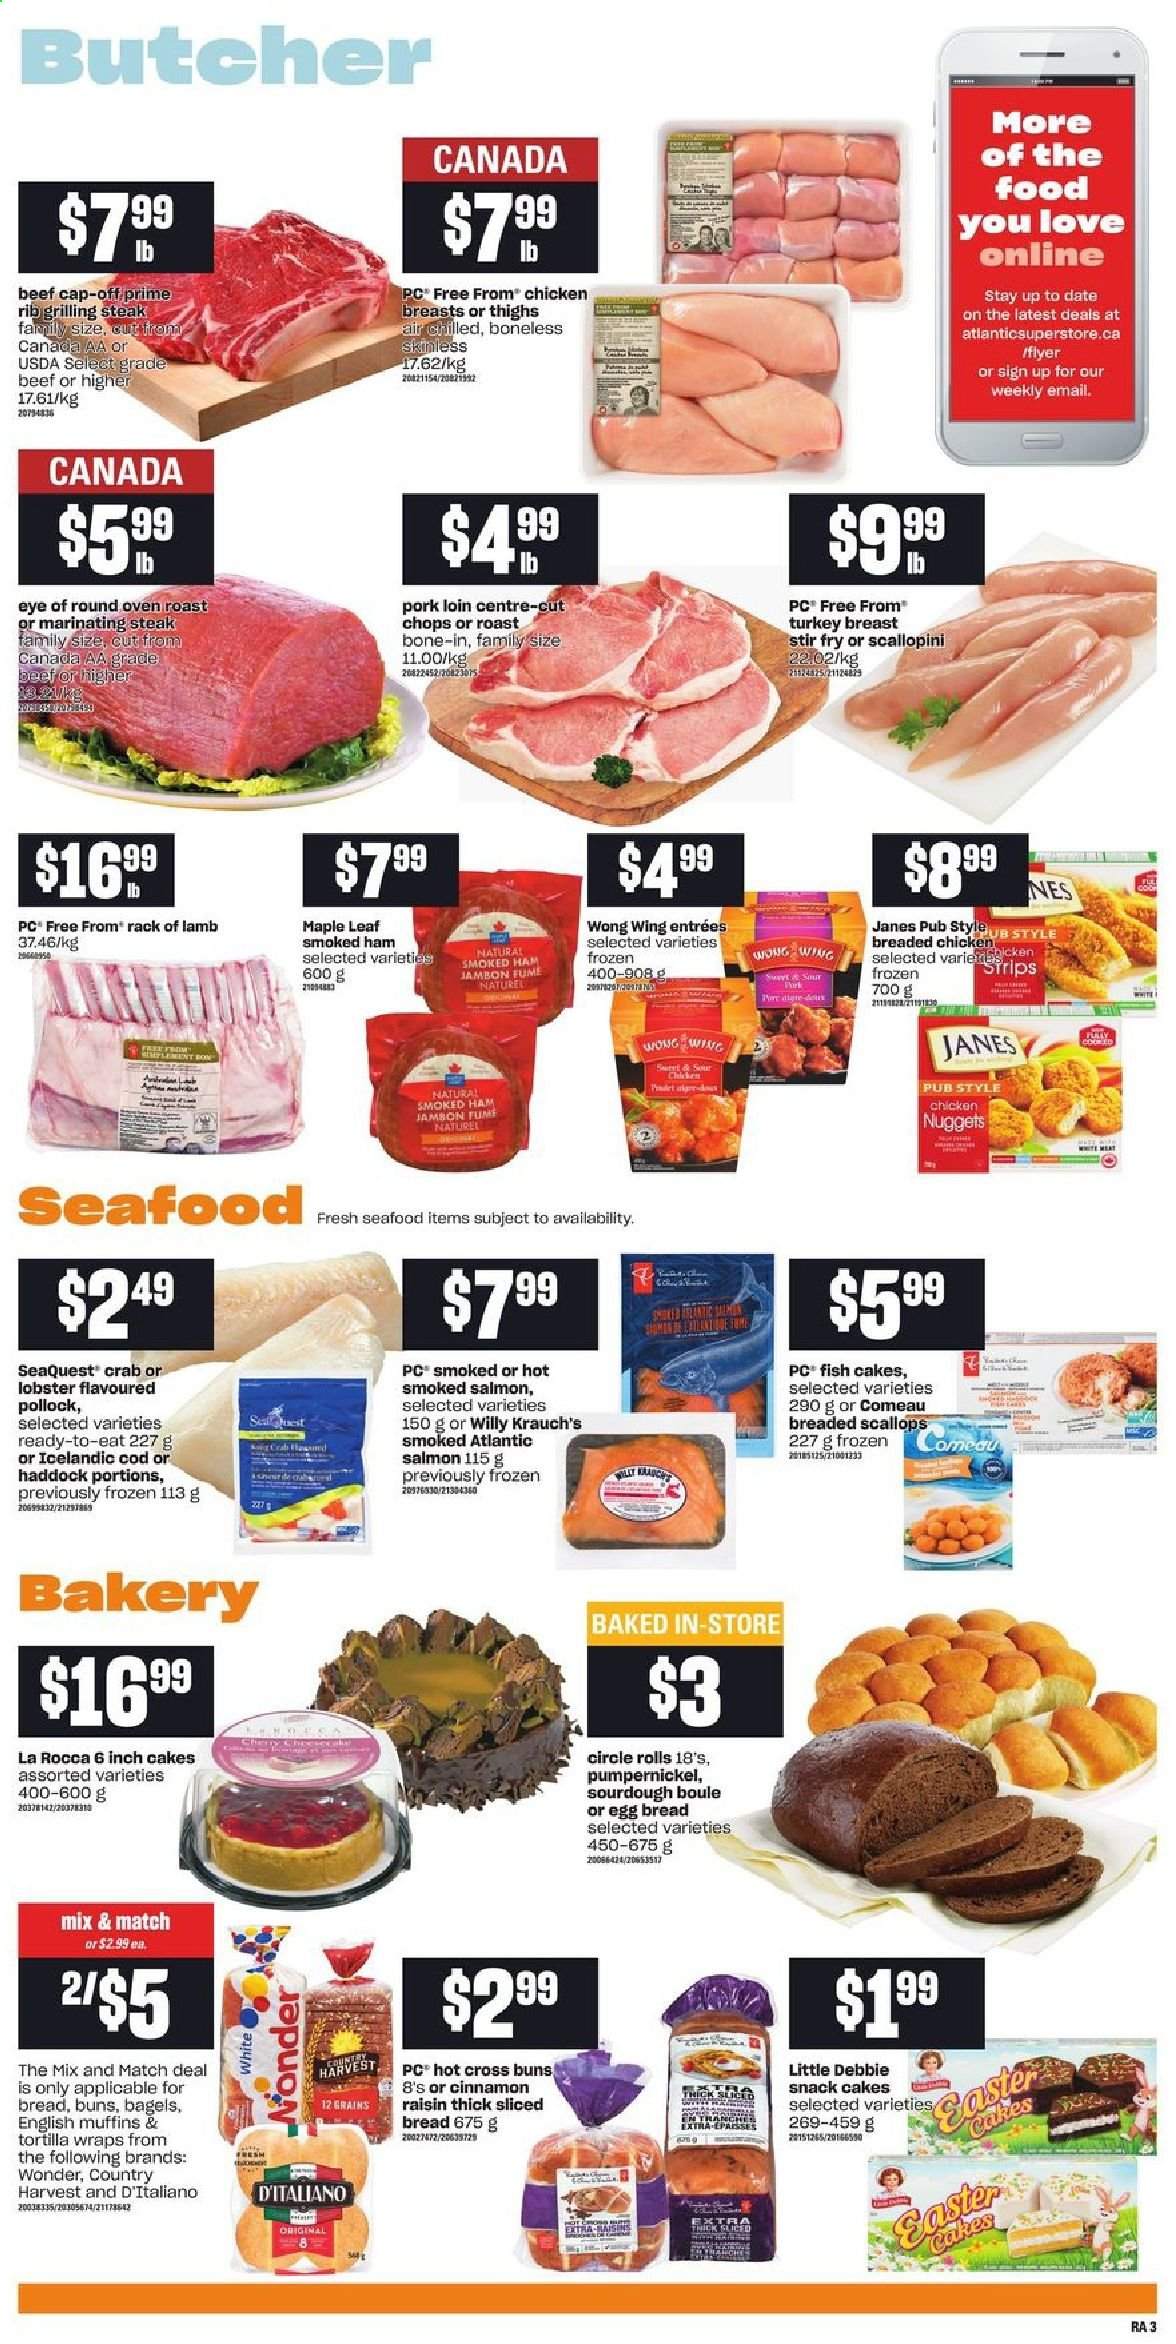 thumbnail - Atlantic Superstore Flyer - April 01, 2021 - April 07, 2021 - Sales products - bagels, english muffins, tortillas, buns, wraps, cod, lobster, salmon, scallops, smoked salmon, haddock, pollock, seafood, crab, fish, nuggets, chicken nuggets, ham, smoked ham, Country Harvest, fish cake, snack, turkey breast, turkey, eye of round, pork loin, pork meat, lamb meat, rack of lamb, steak. Page 4.